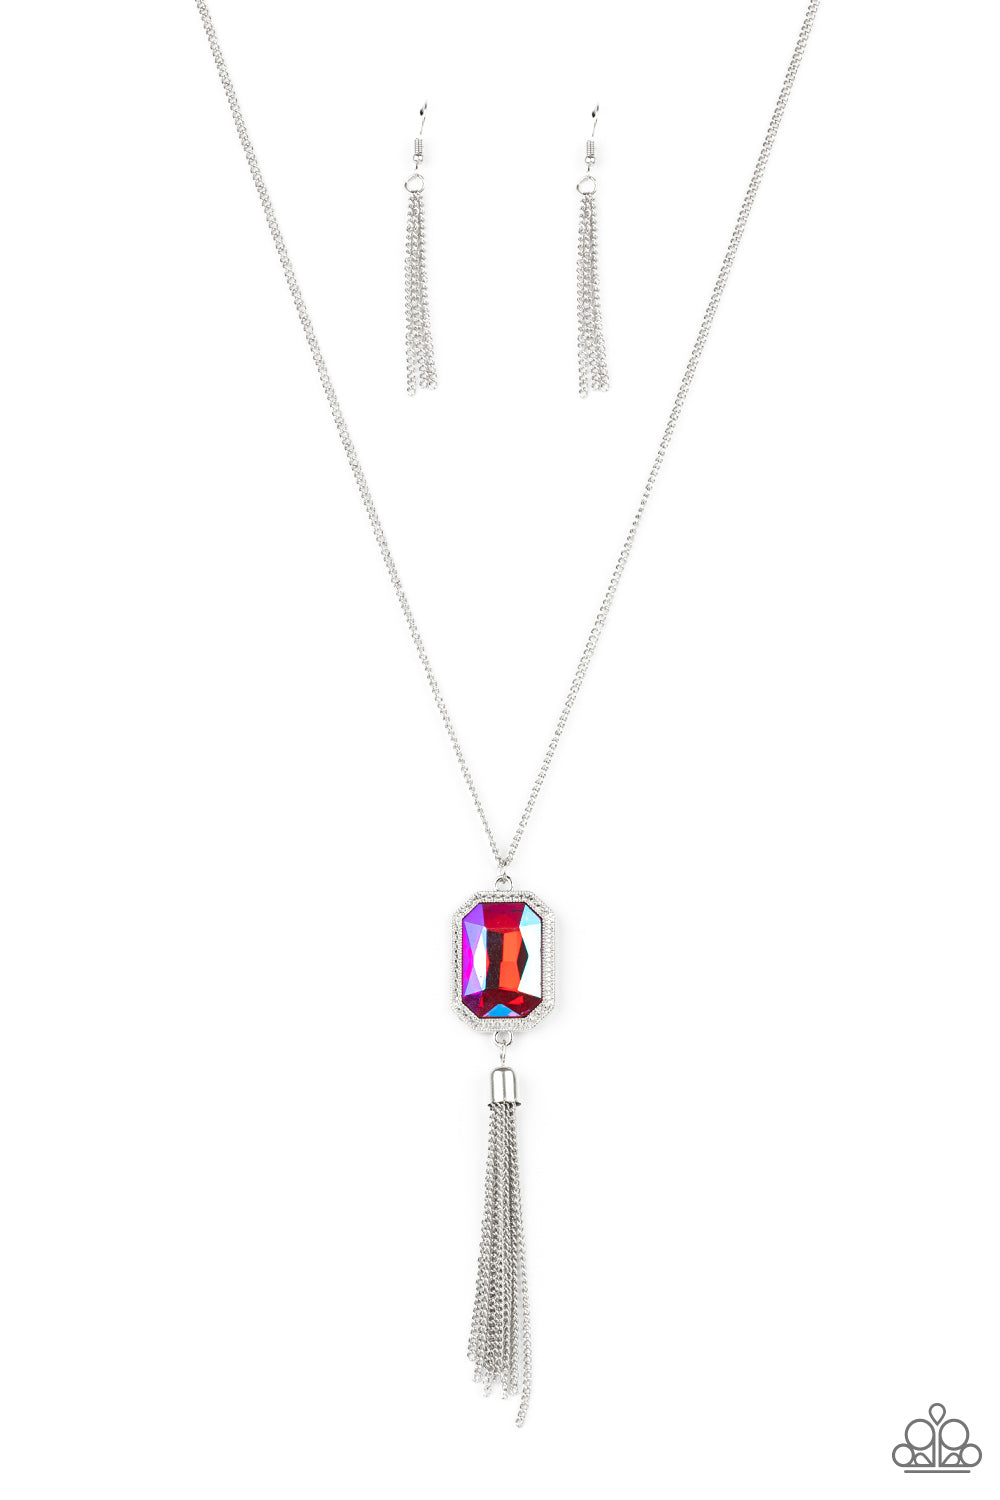 Blissed Out Opulence - Pink Iridescent Necklaces an impressive pink emerald cut gem is pressed into the center of a silver studded frame, creating an ethereal pop of color at the bottom of a lengthened silver chain. A silver chain tassel swings from the bottom of the pendant, adding flirtatious movement to the opulent display. Features an adjustable clasp closure.  Sold as one individual necklace. Paparazzi Jewelry is lead and nickel free so it's perfect for sensitive skin too!